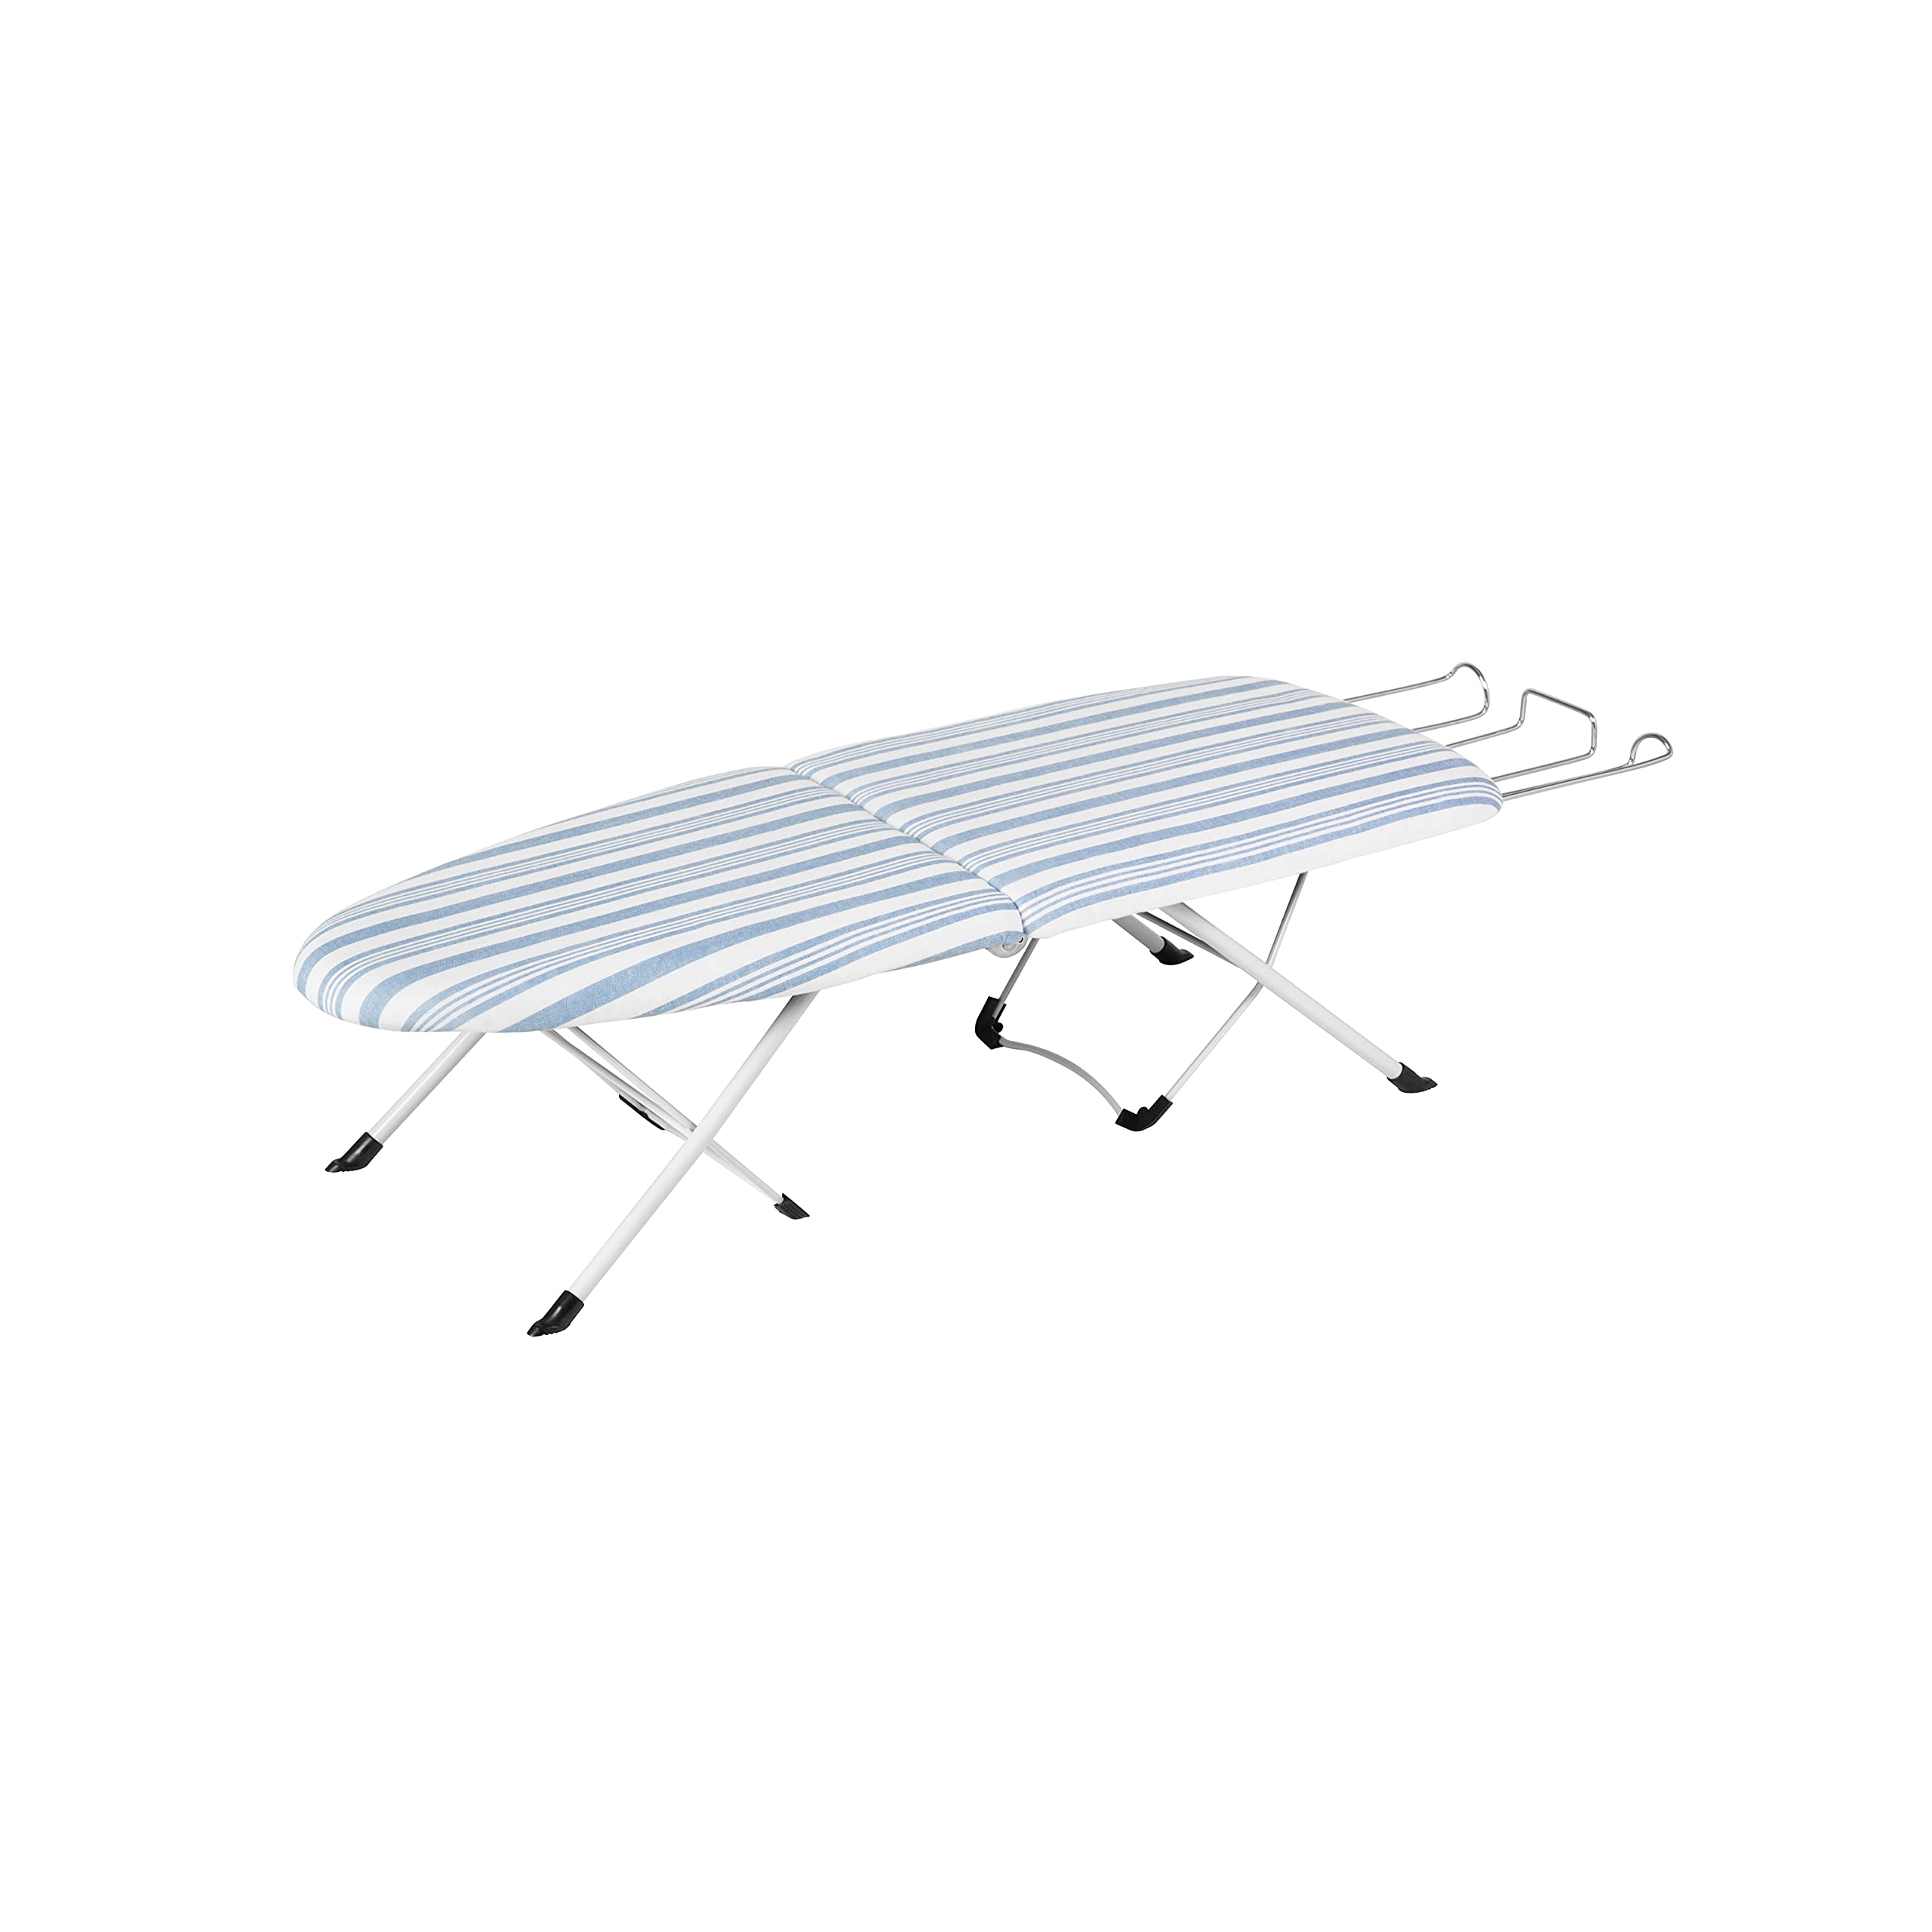 Honey-Can-Do Folding Tabletop Ironing Board with Iron Rest BRD-09222 Blue, 32” L x 12” W